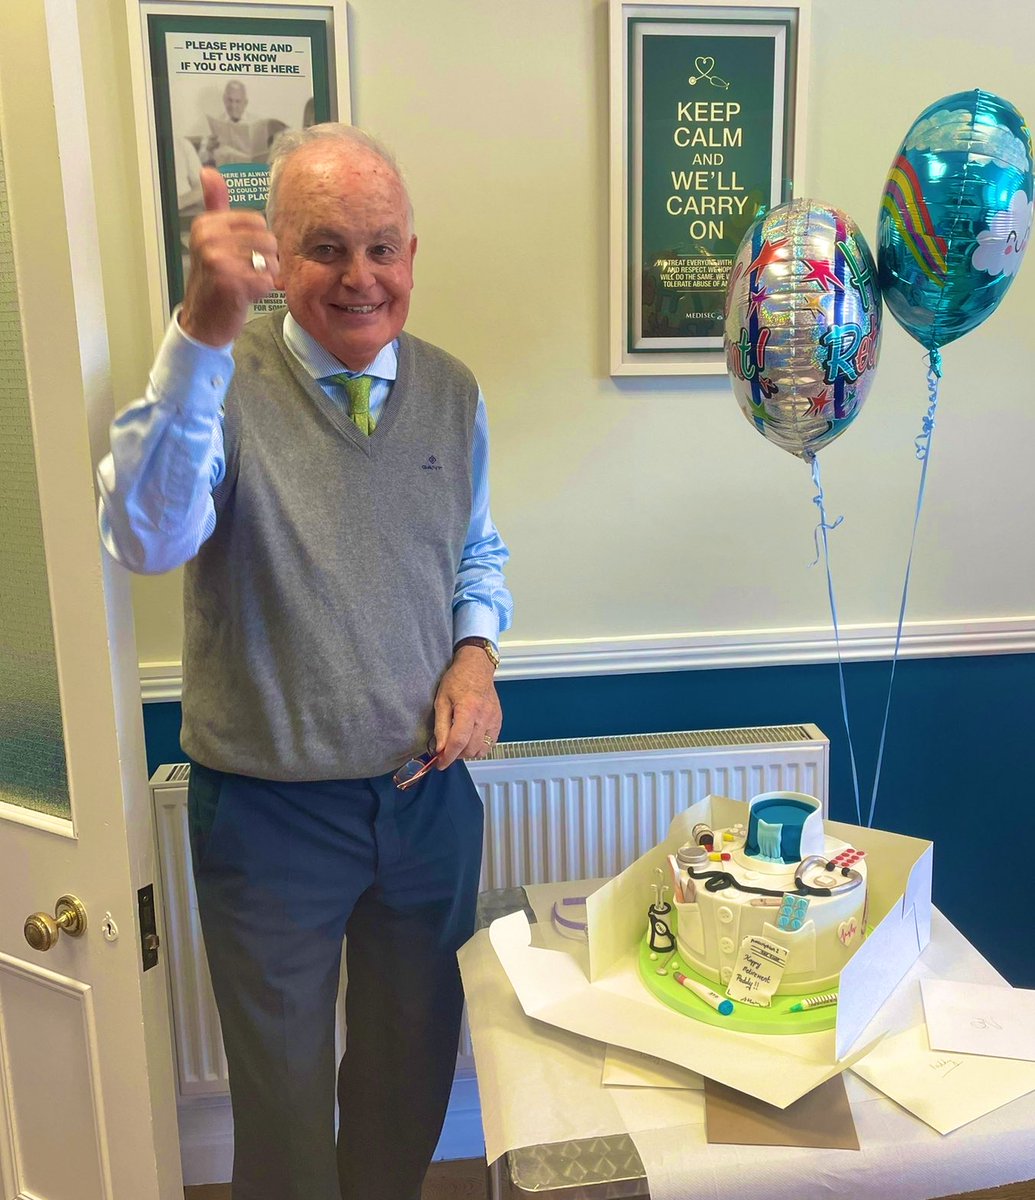 Today we bid a fond farewell to Dr Paddy Kelly who leaves Drumcondra Medical after 41 years. A man of the community. Loved by all. Thank you for everything Paddy. Wishing you a long and healthy retirement. @ICGPnews @materprivate @gpbuddy @IMT_latest @MPSdoctorsIRE @IMO_IRL